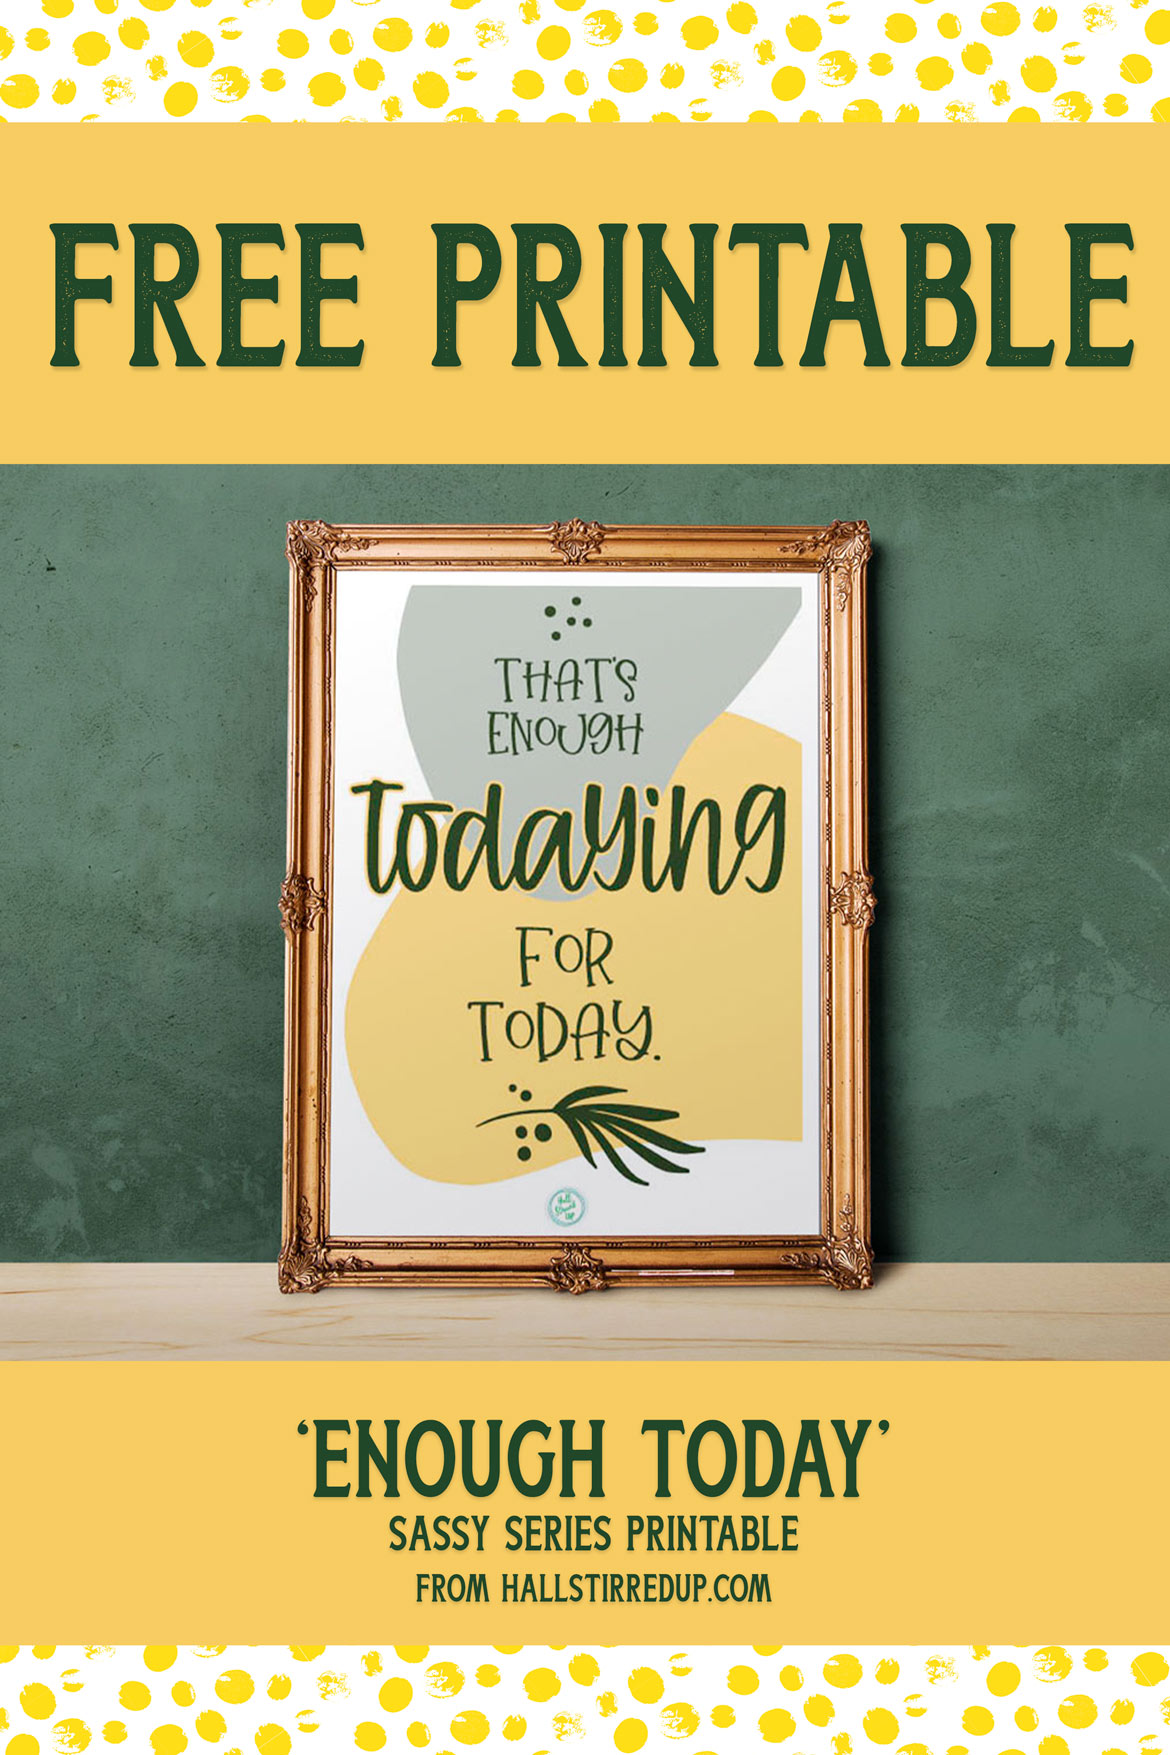 That's enough for today Download a free Sassy Series printable